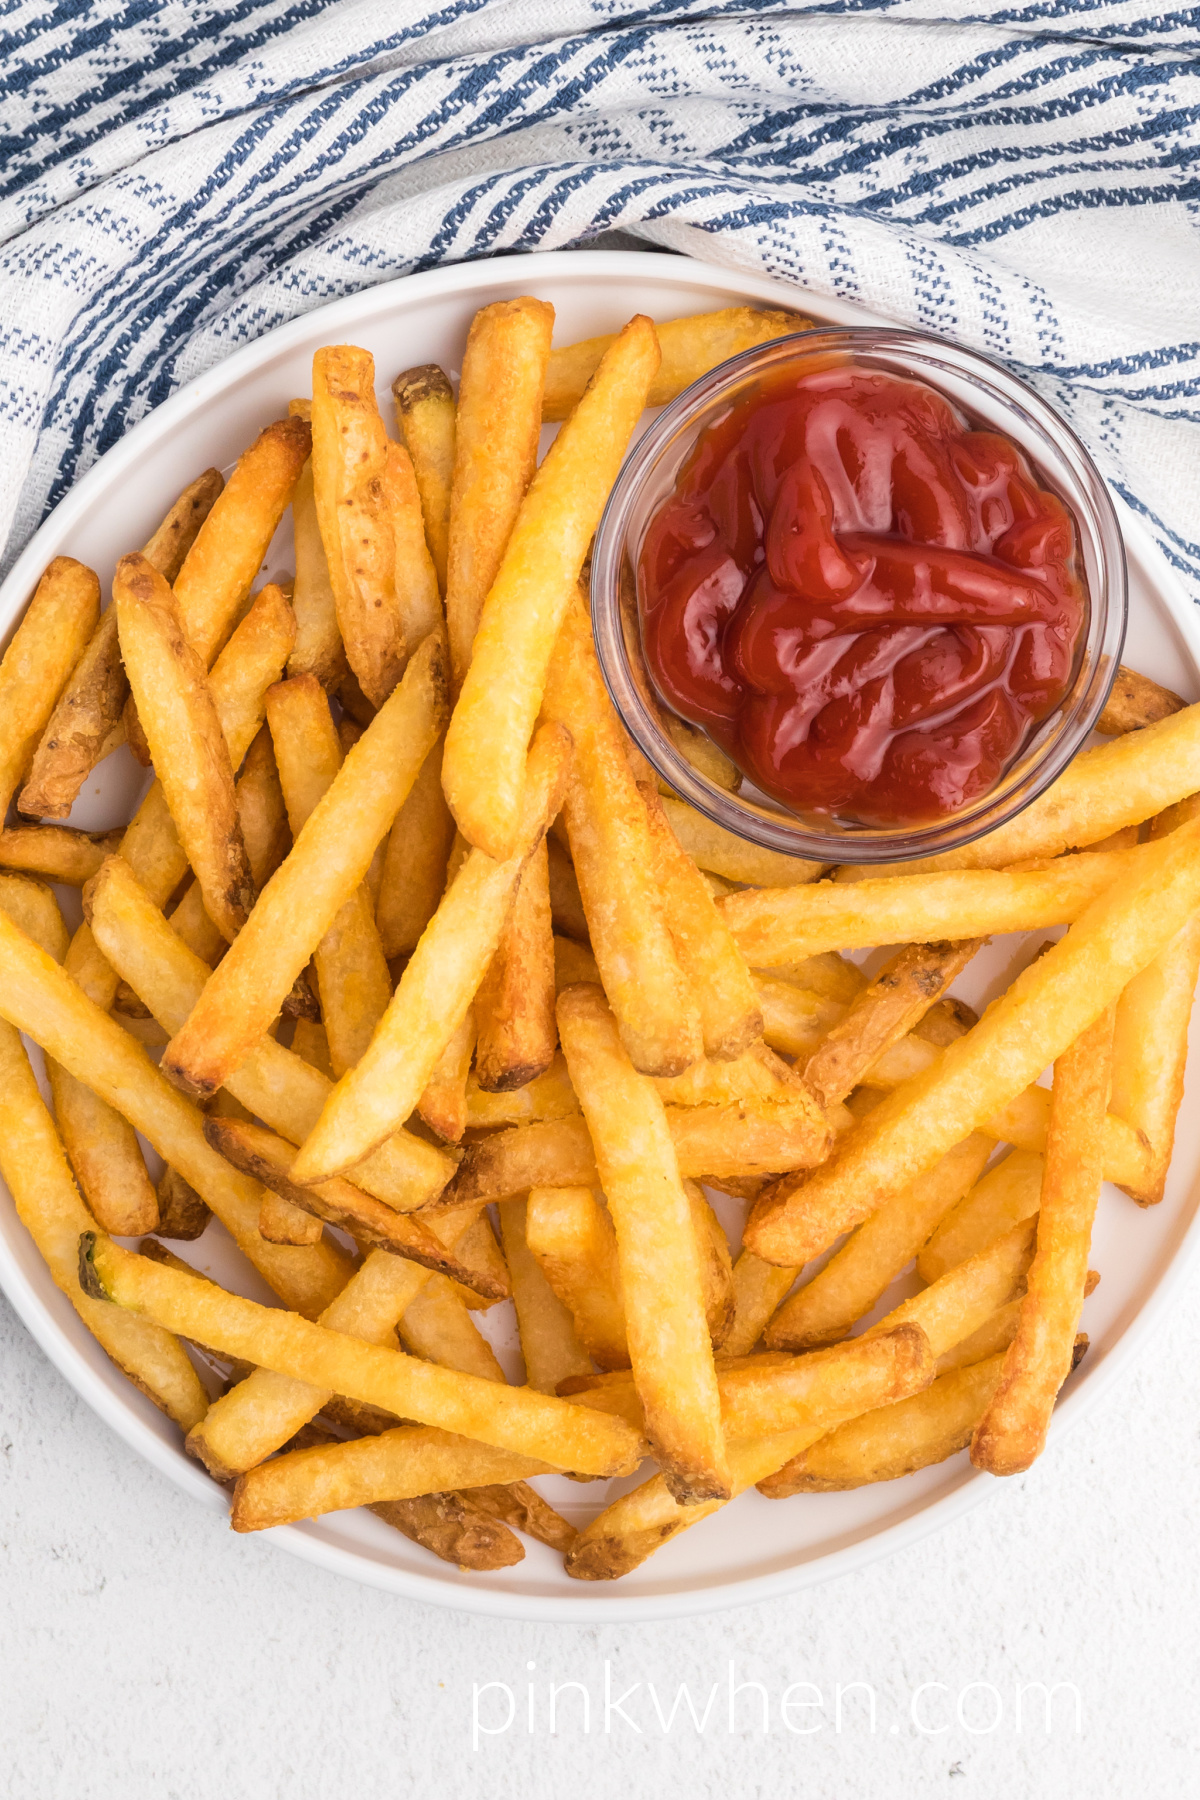 Fully cooked french fries that were cooked from frozen in an air fryer, on a white plate with a side of ketchup.